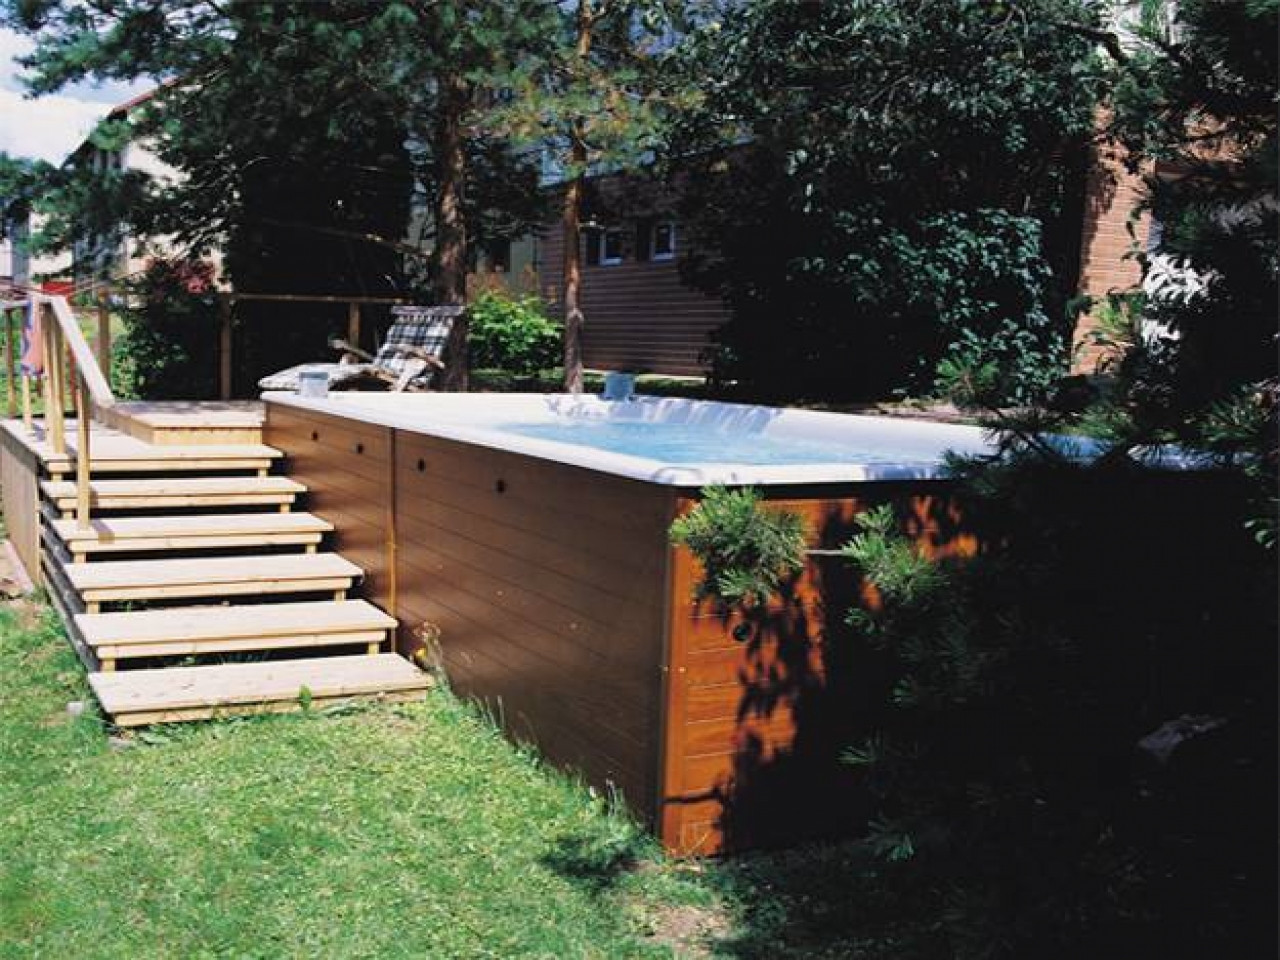 Outdoor Hot Tub Landscaping Ideas
 Purple room ideas for adults small two person hot tub